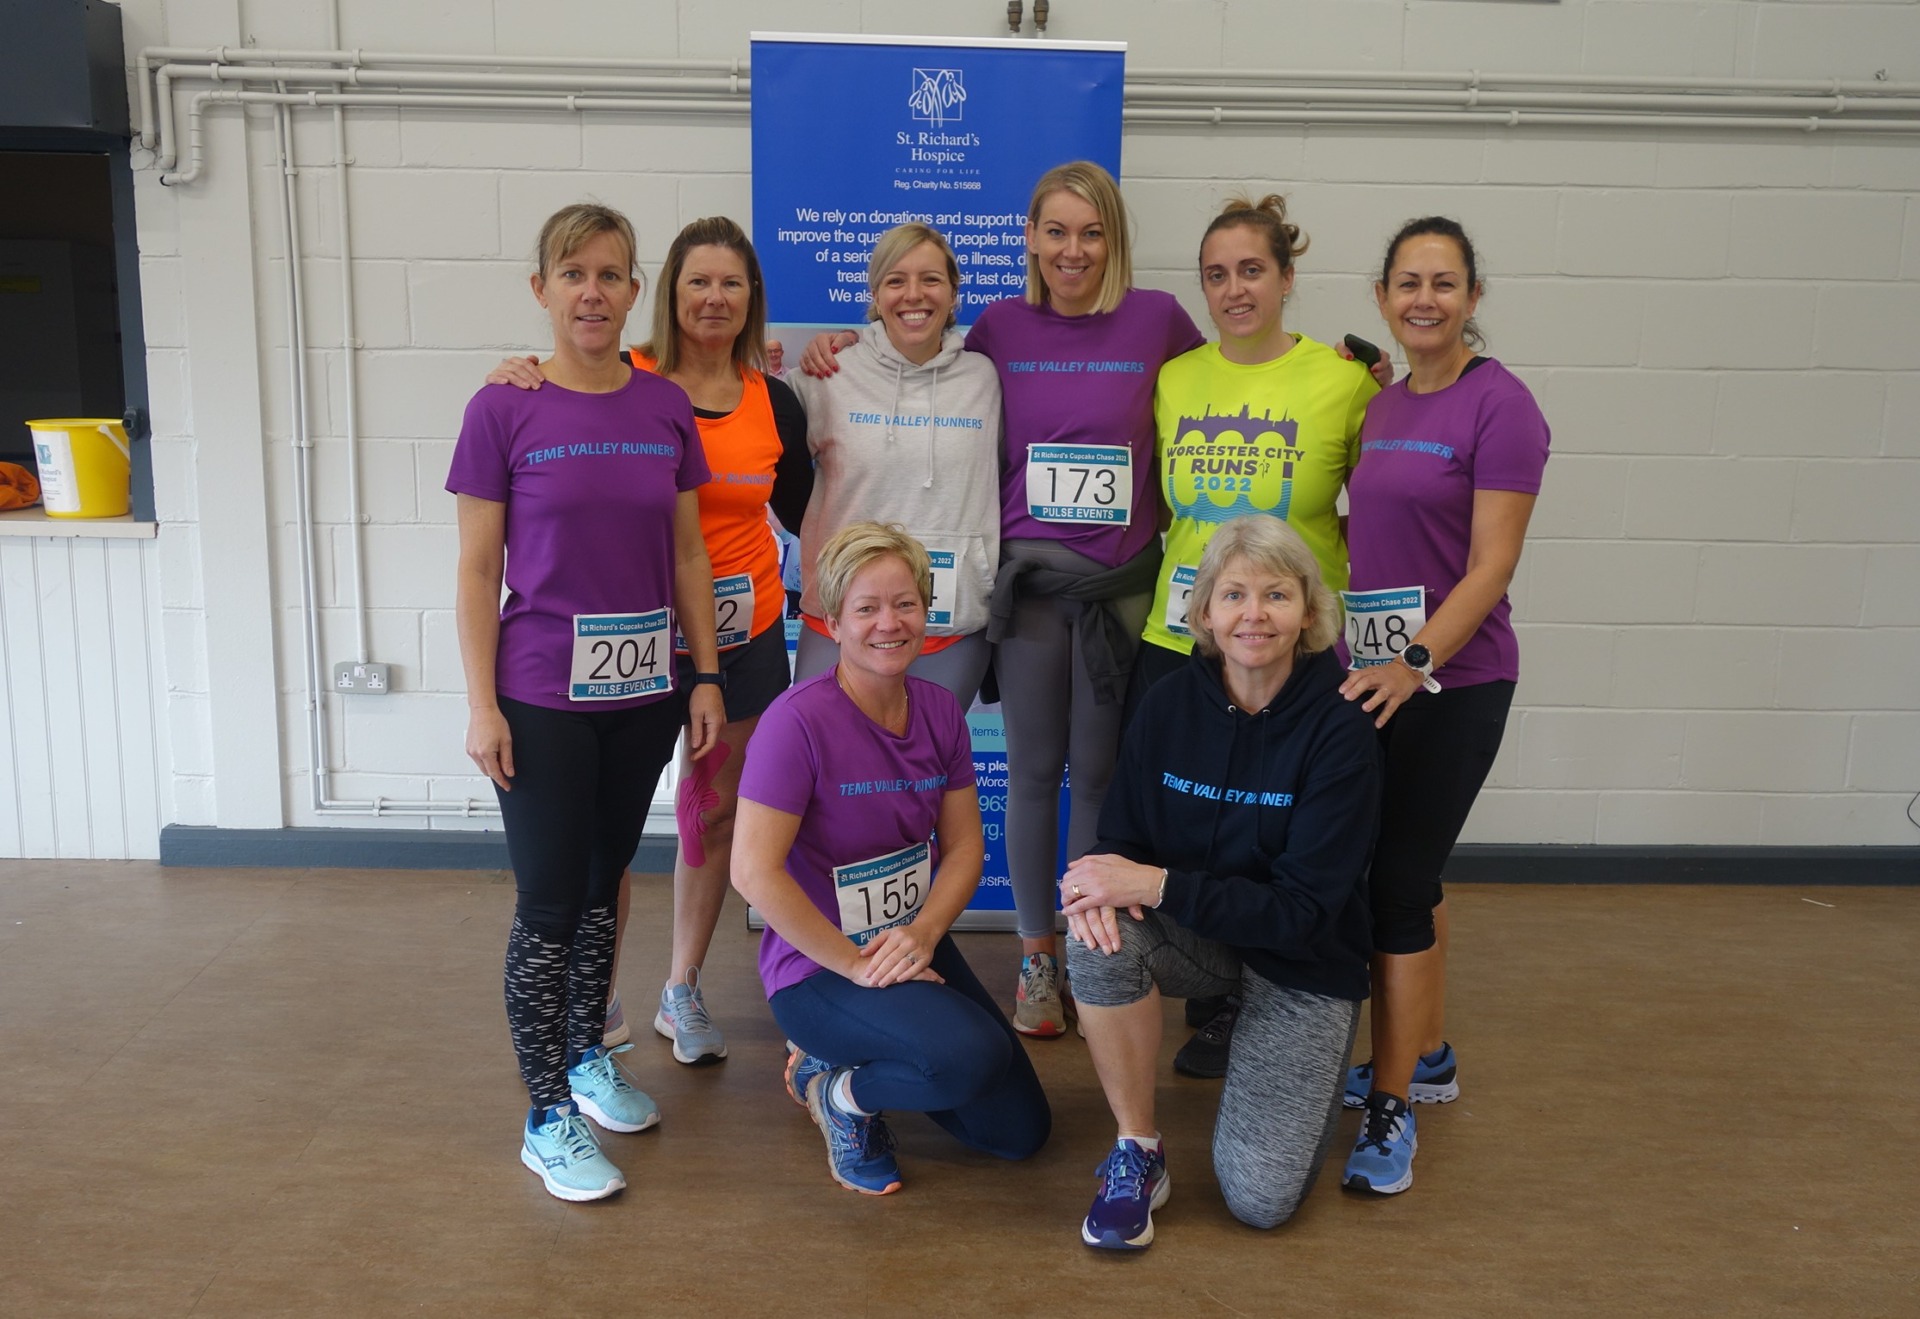 Participants in the St Richard's Cupcake Chase, pictured in their running gear before the race.